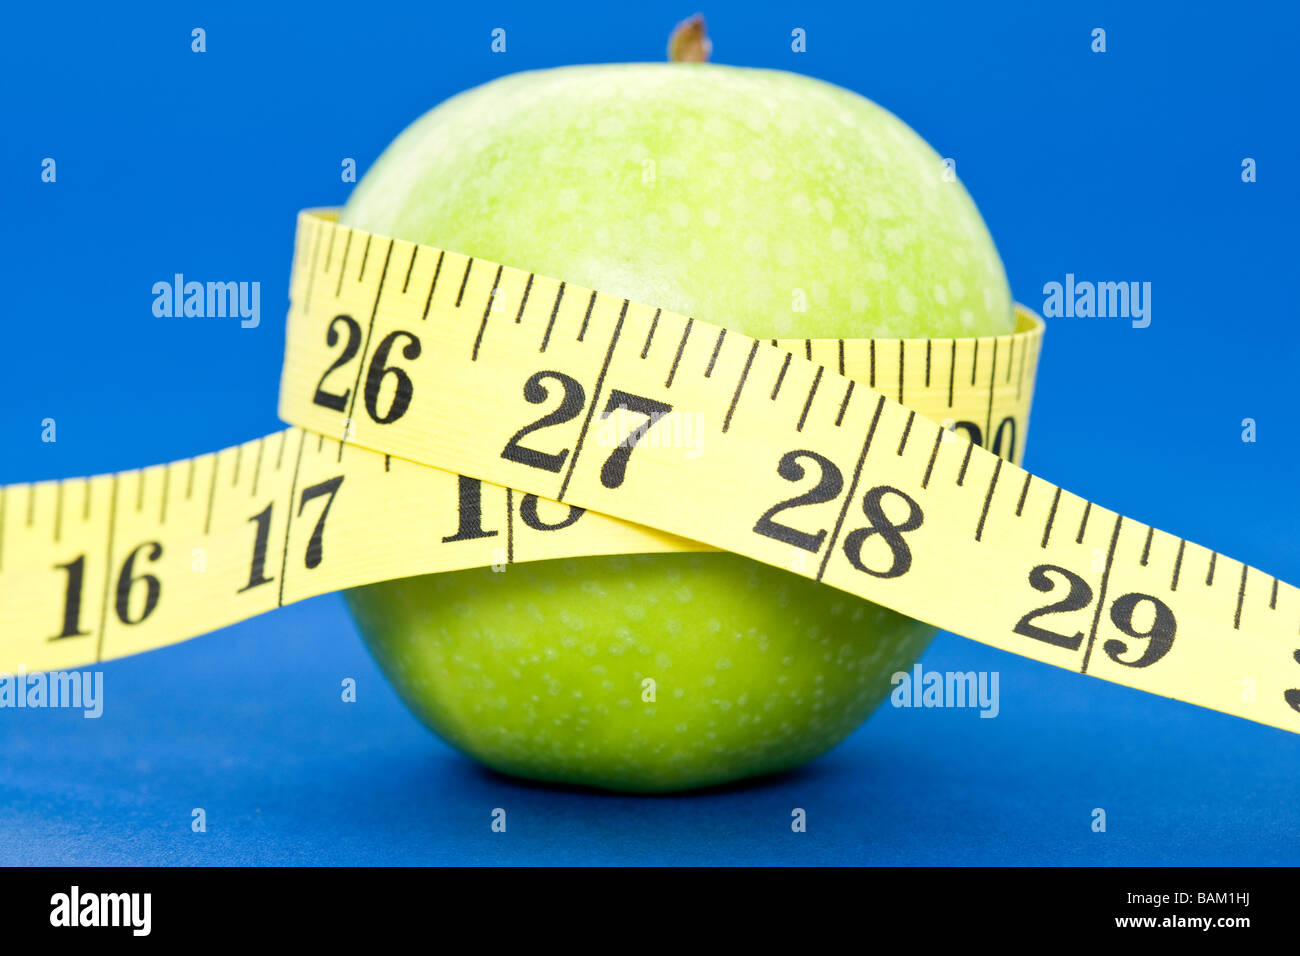 A tape measure wrapped around an apple Stock Photo